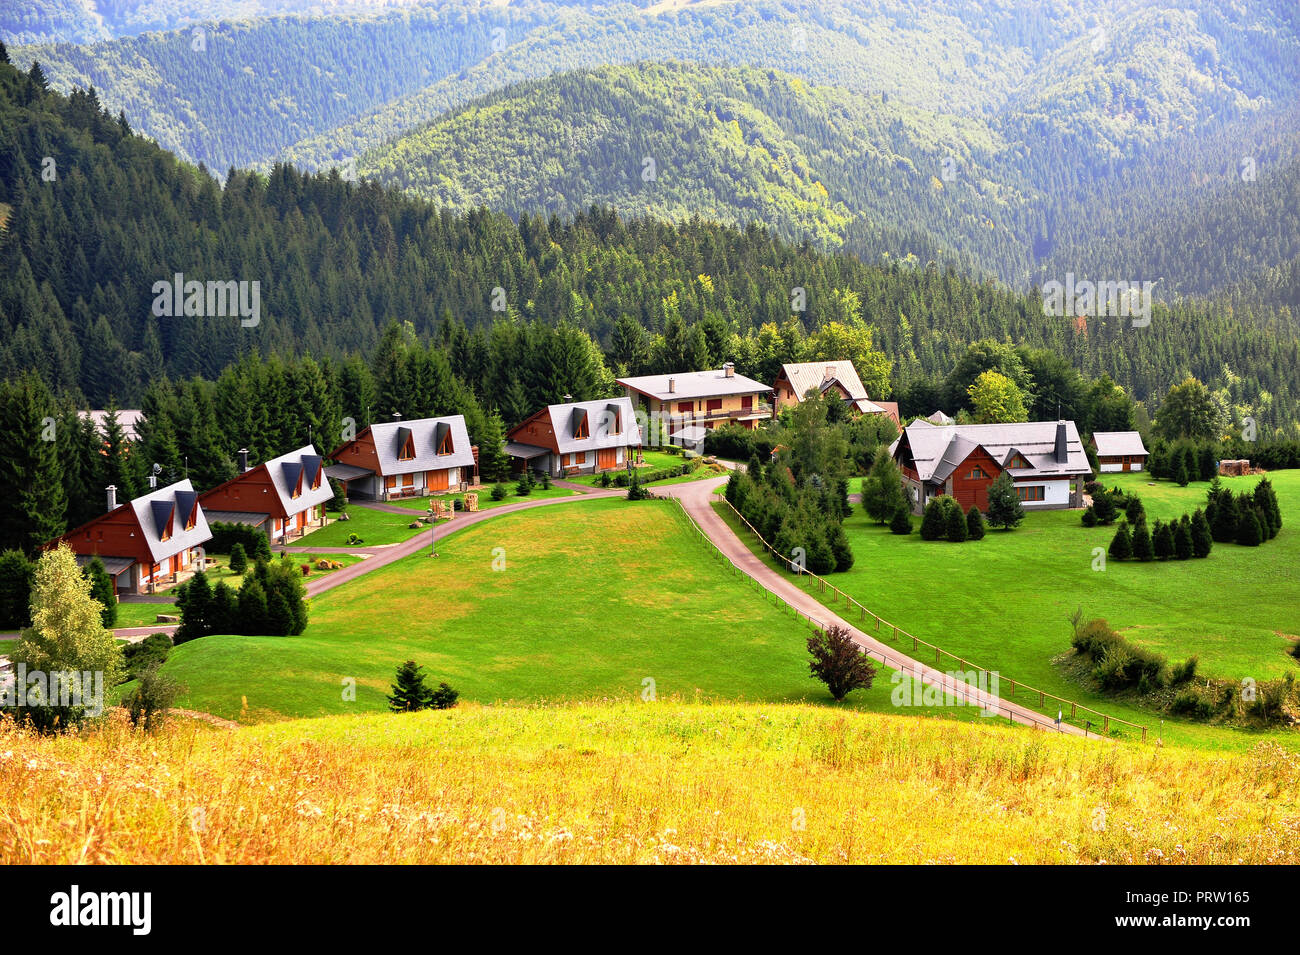 Small village in Low Tatras national park, Slovakia. Rural Summer landscape with houses in green valley under mountains Stock Photo